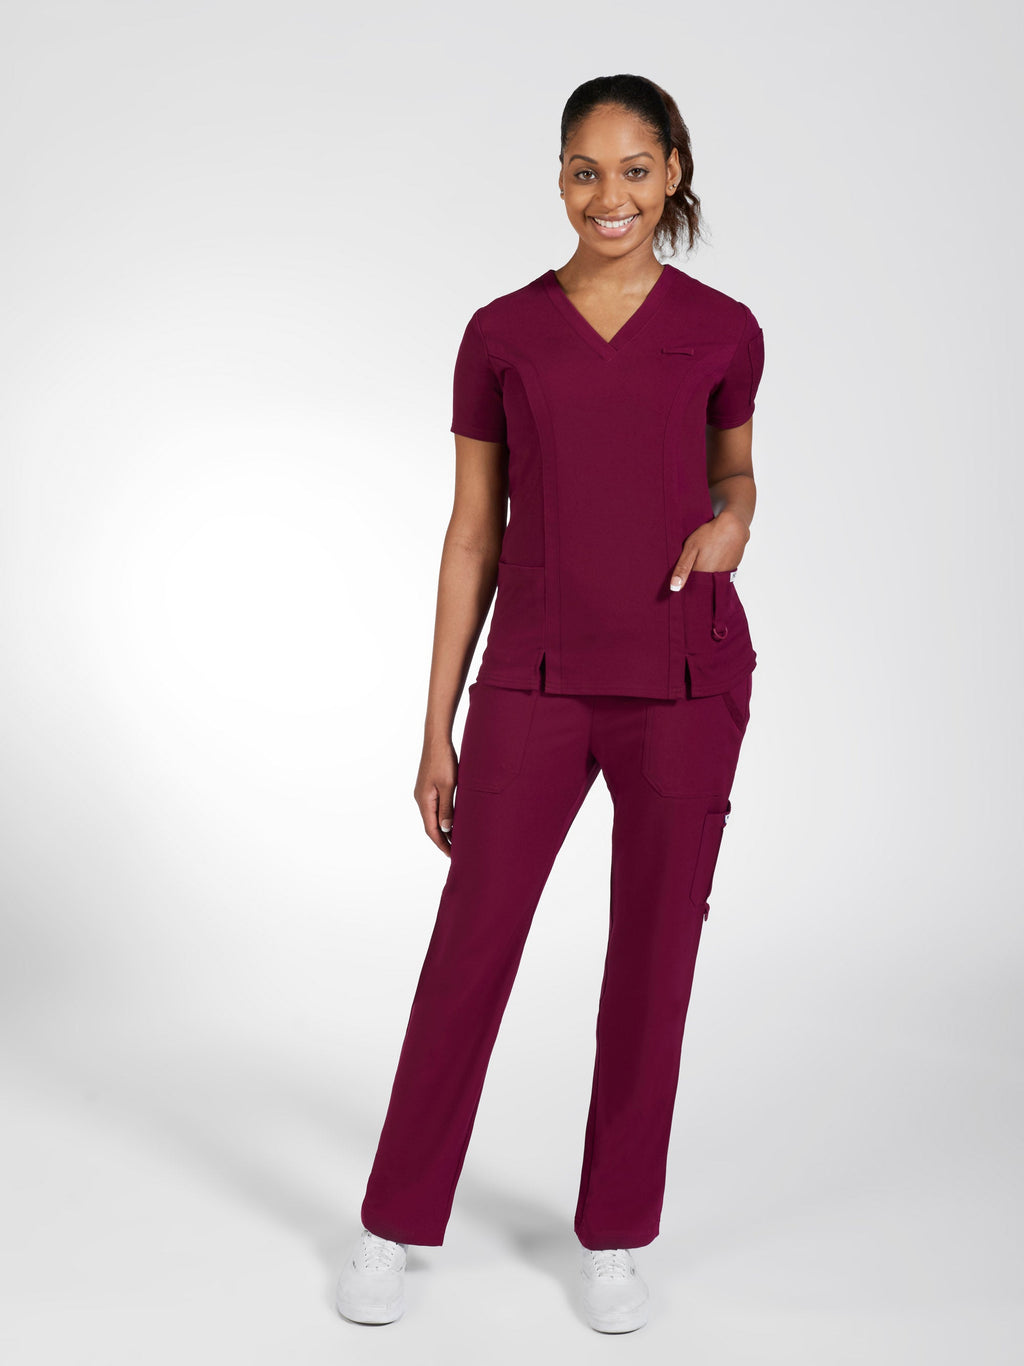 Product - MOBB Clearance The Cathy Scrub Top